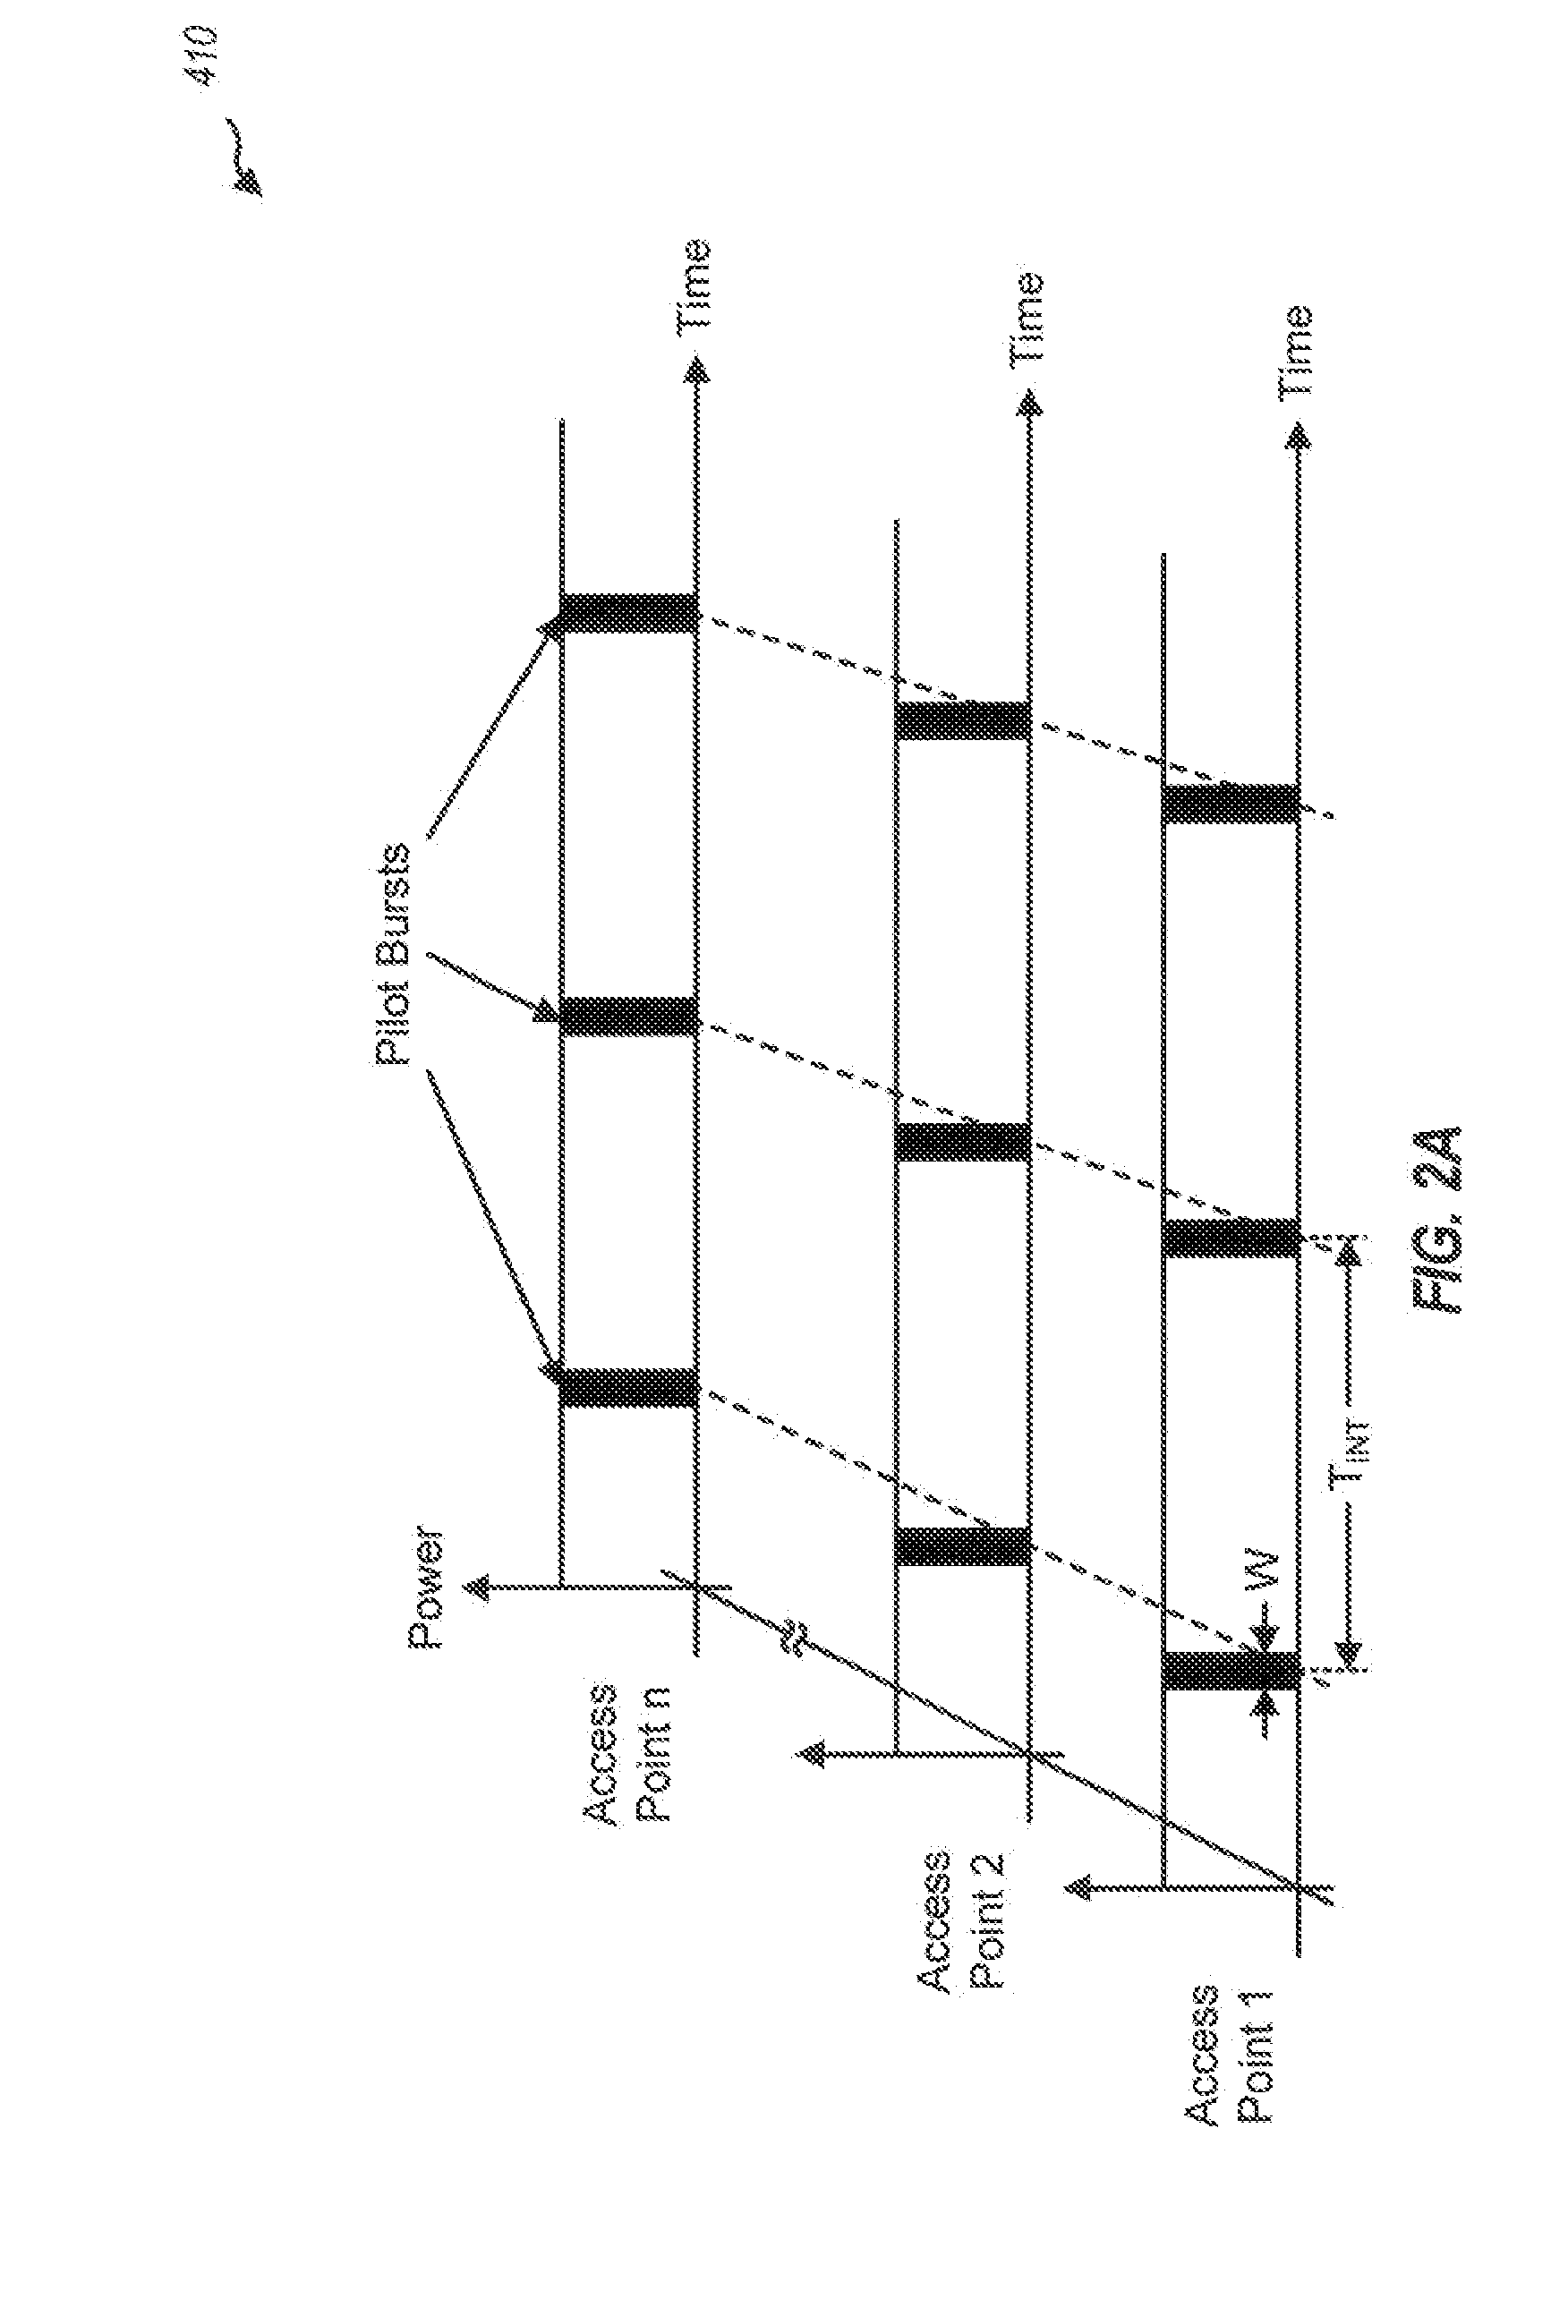 Pilot reference transmission for a wireless communication system